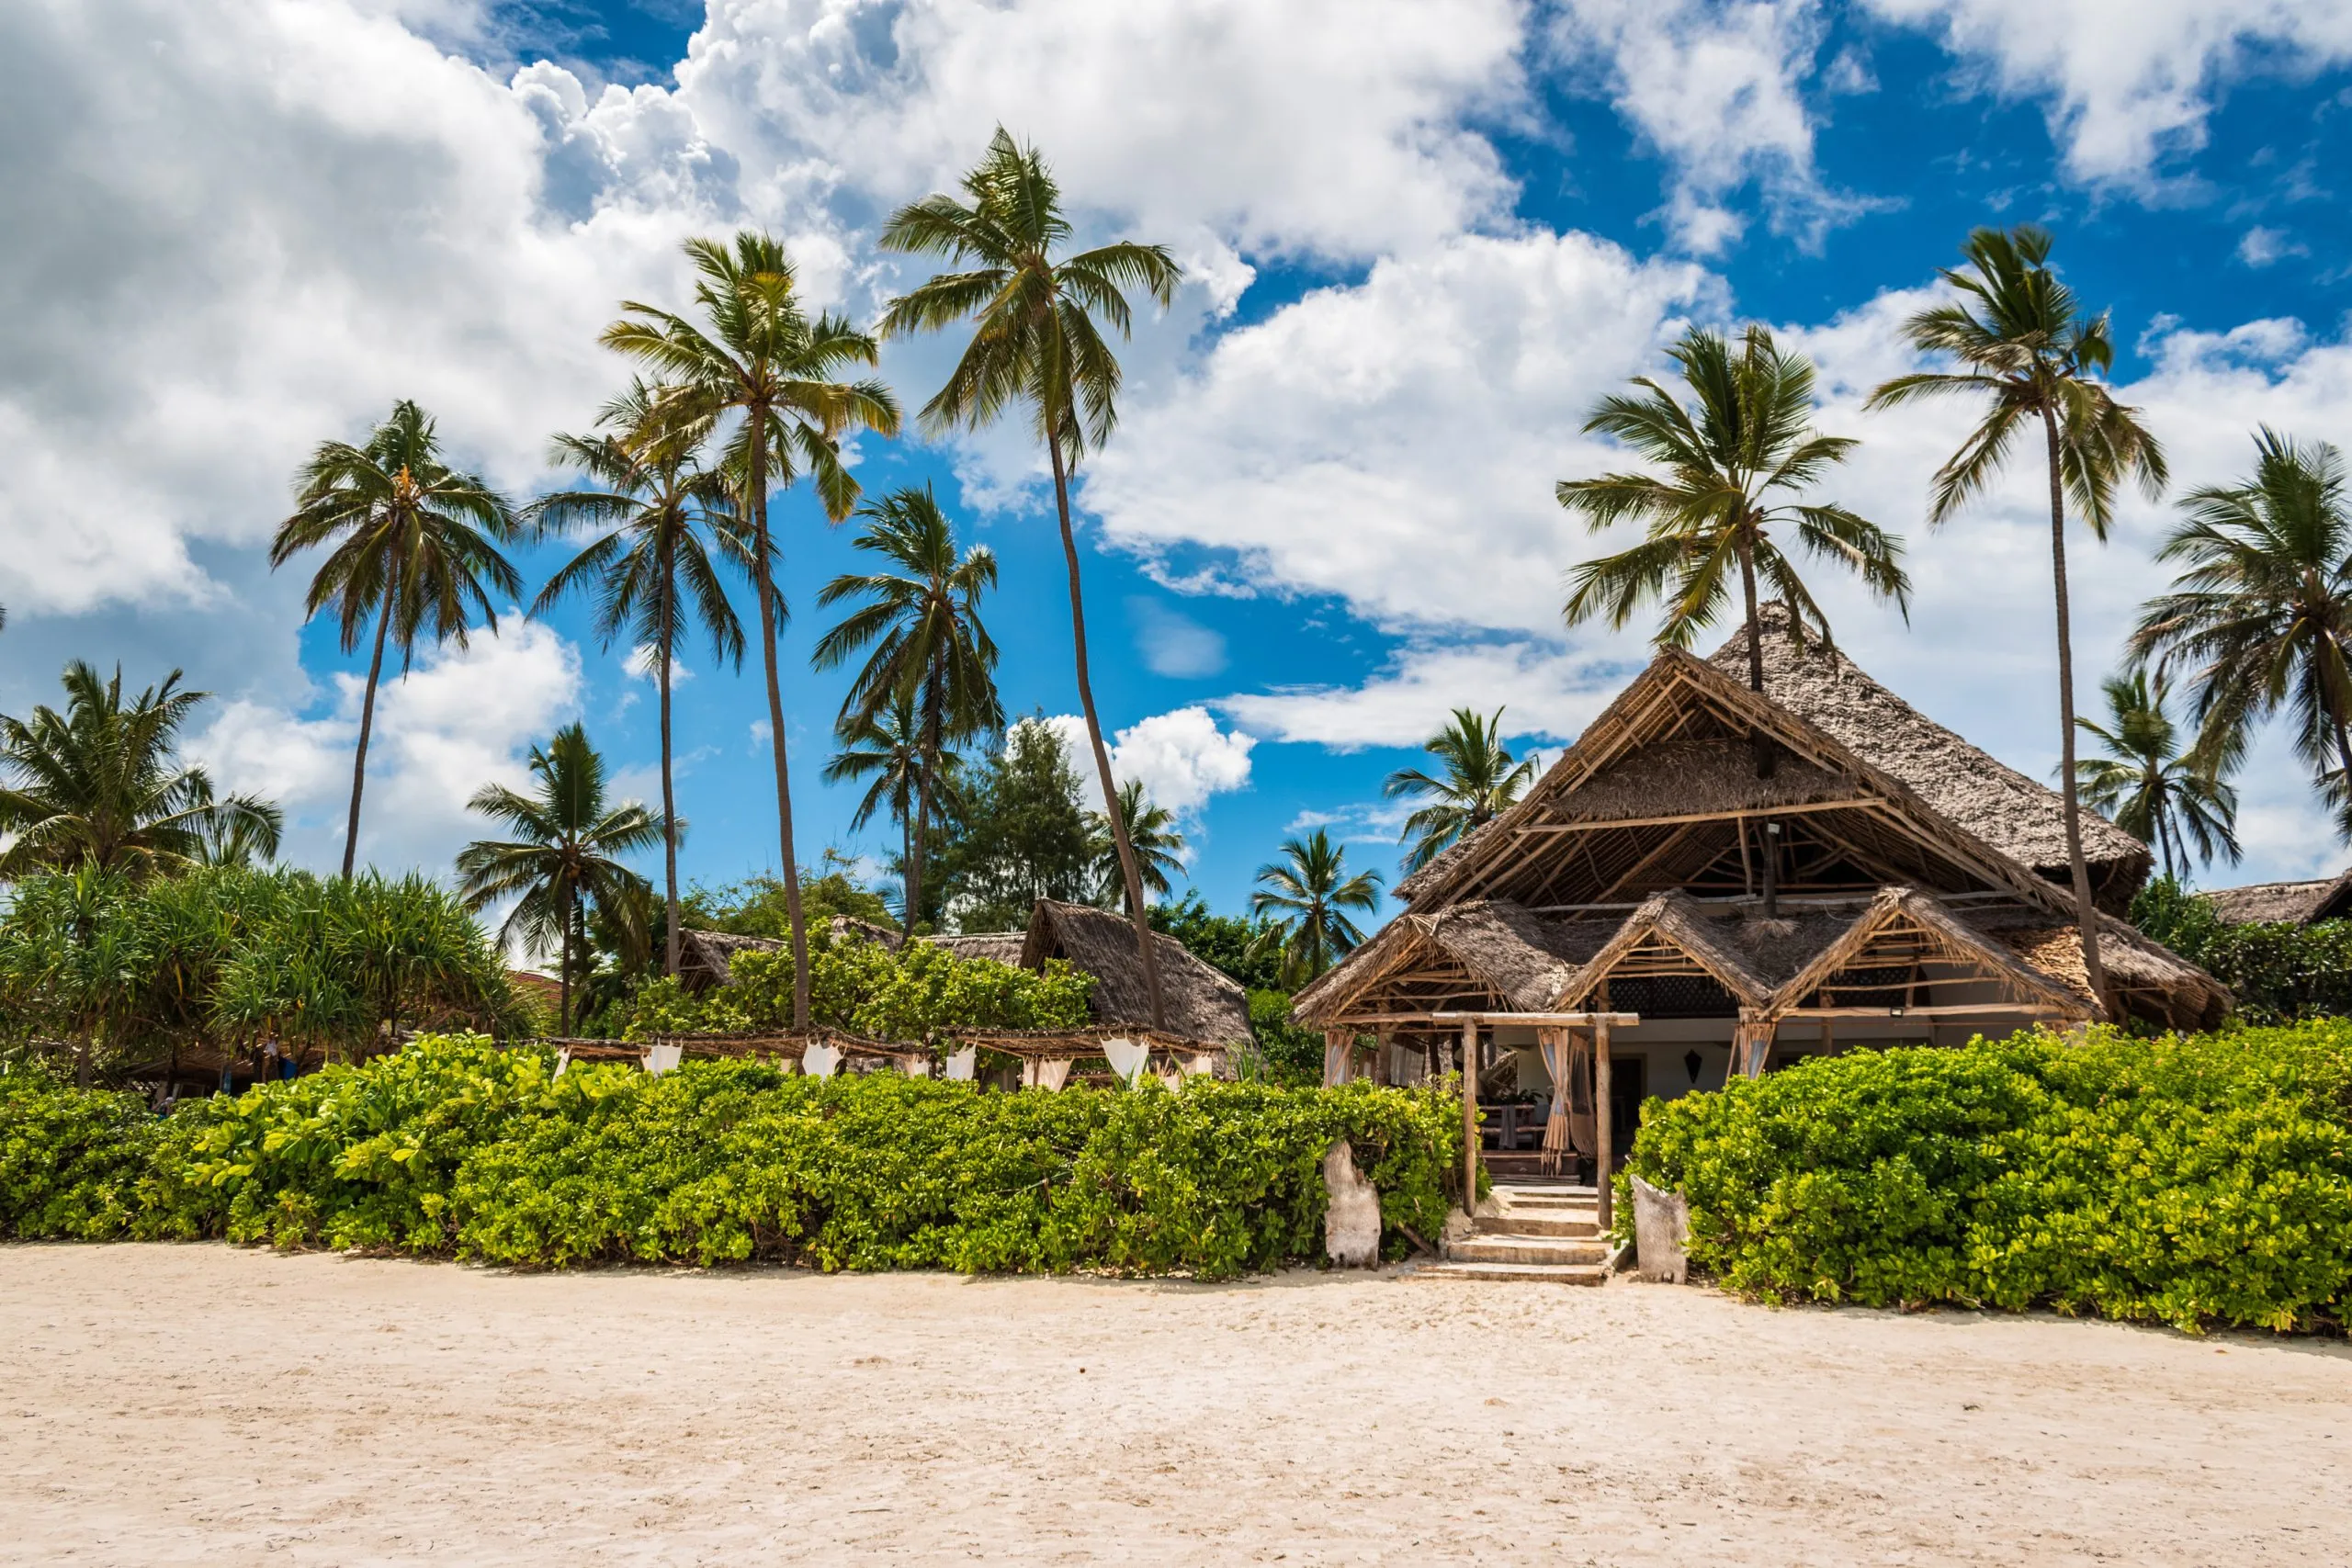 View of the house with thatched roof located among the palm trees on Matemwe Beach, Zanzibar, Tanzania, Africa